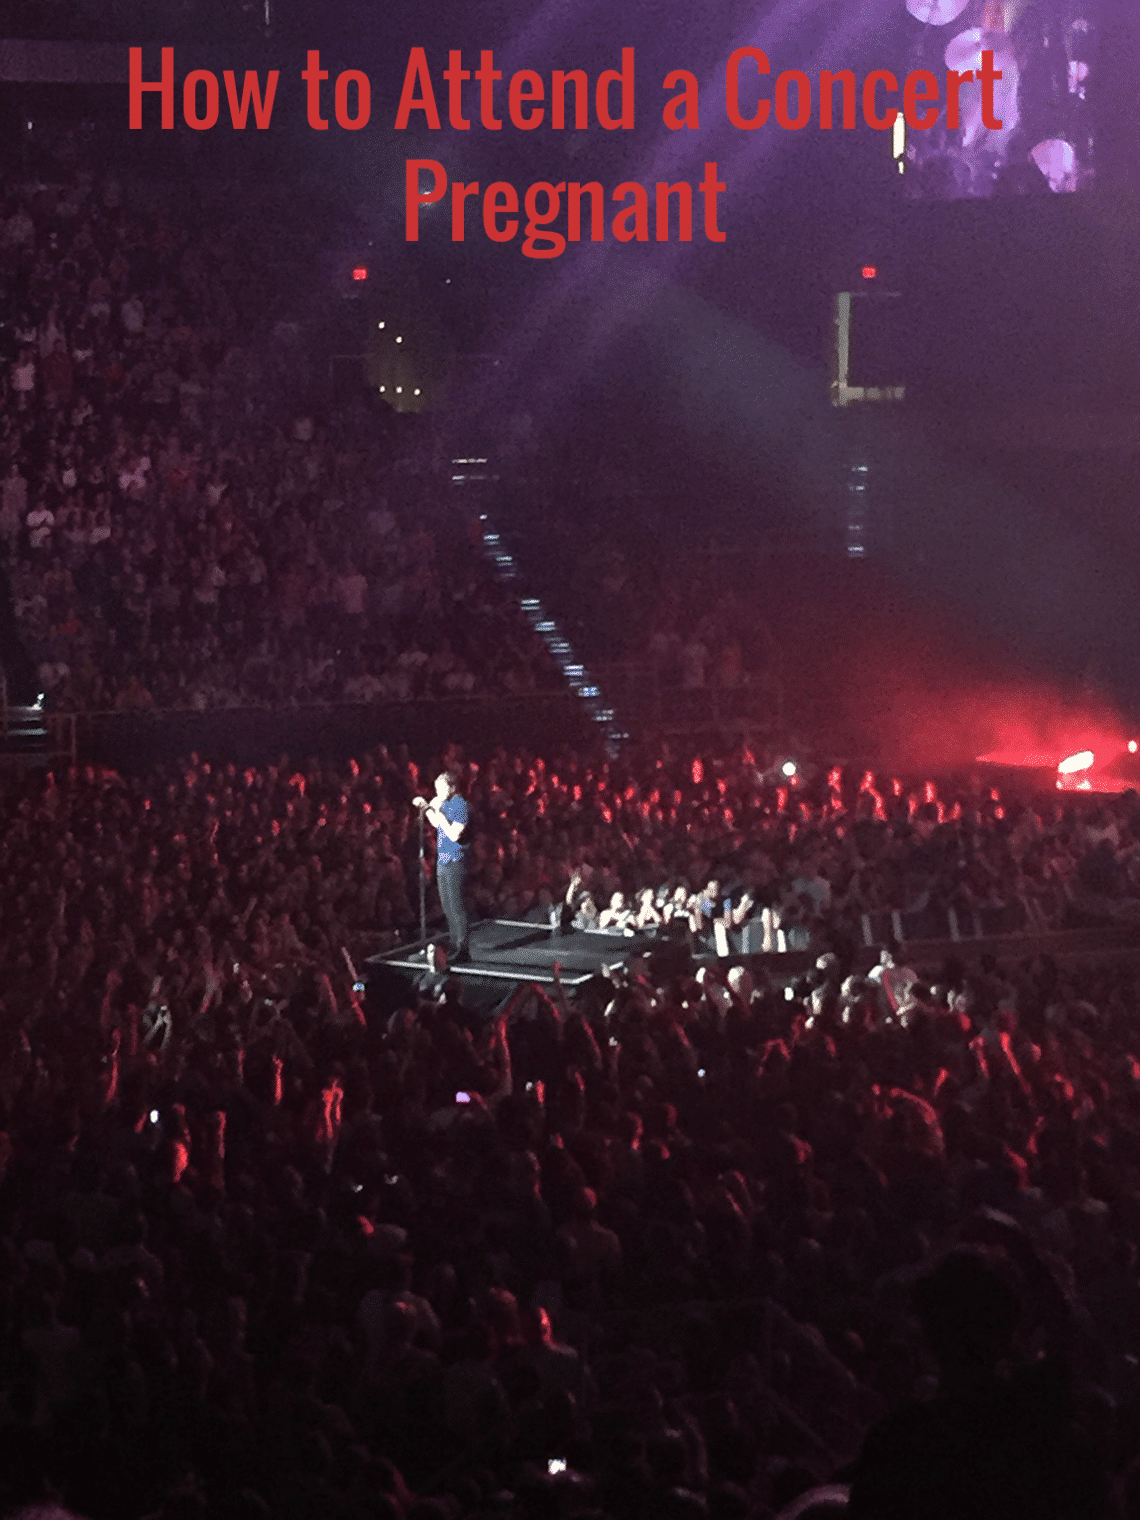 Attending a Concert While Pregnant